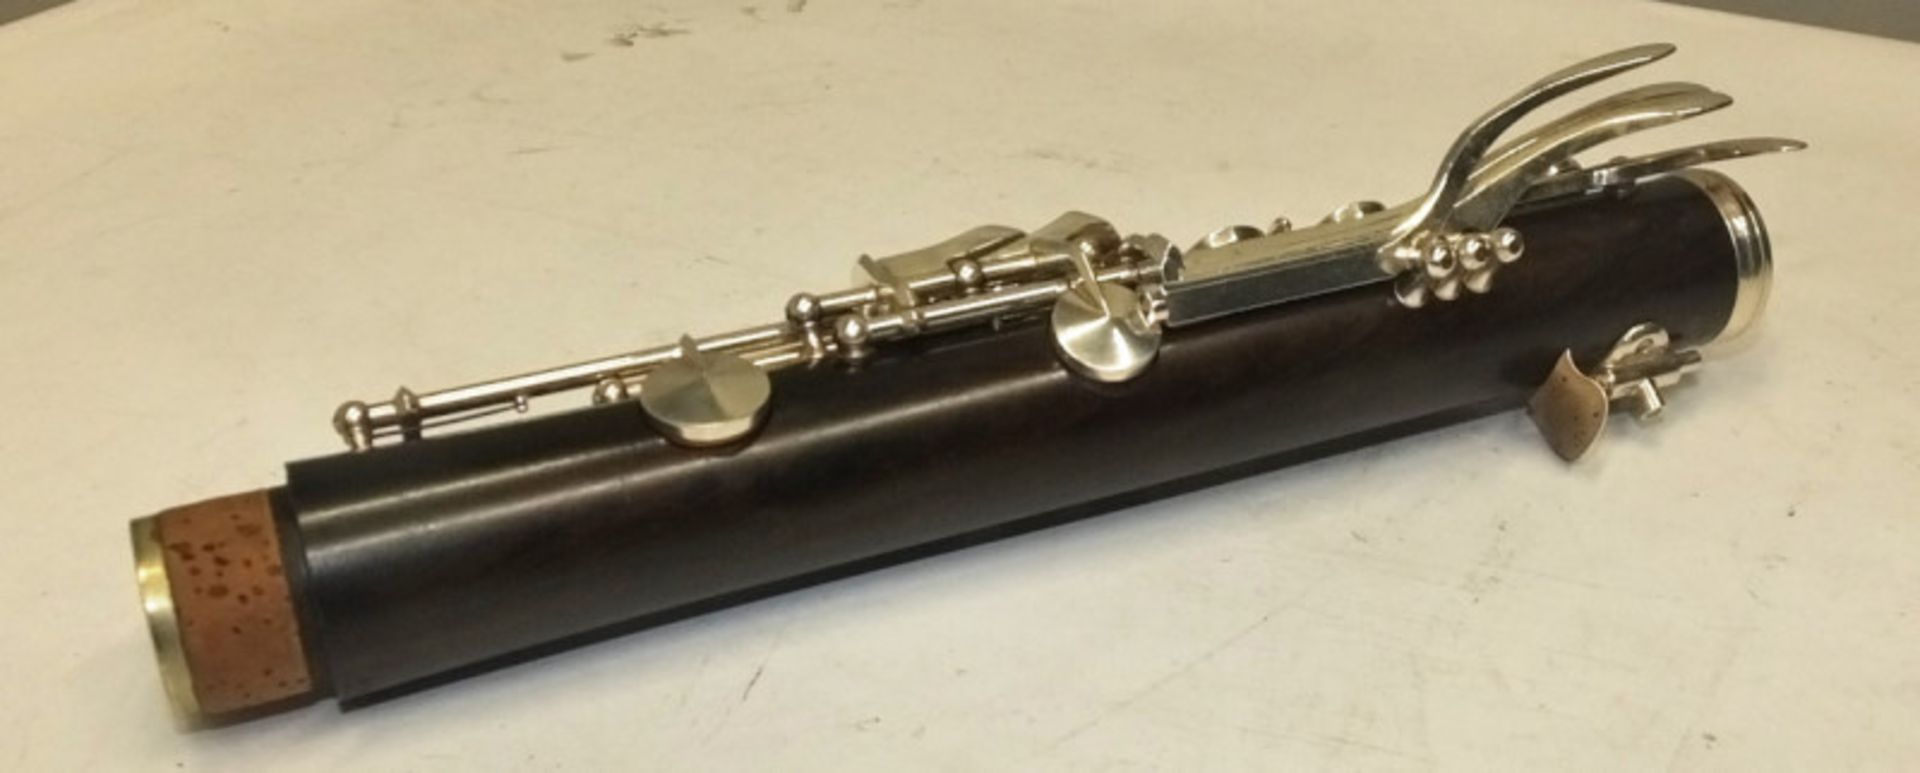 Howarth S2 Clarinet in case - Serial Number - 2228. - Image 3 of 17